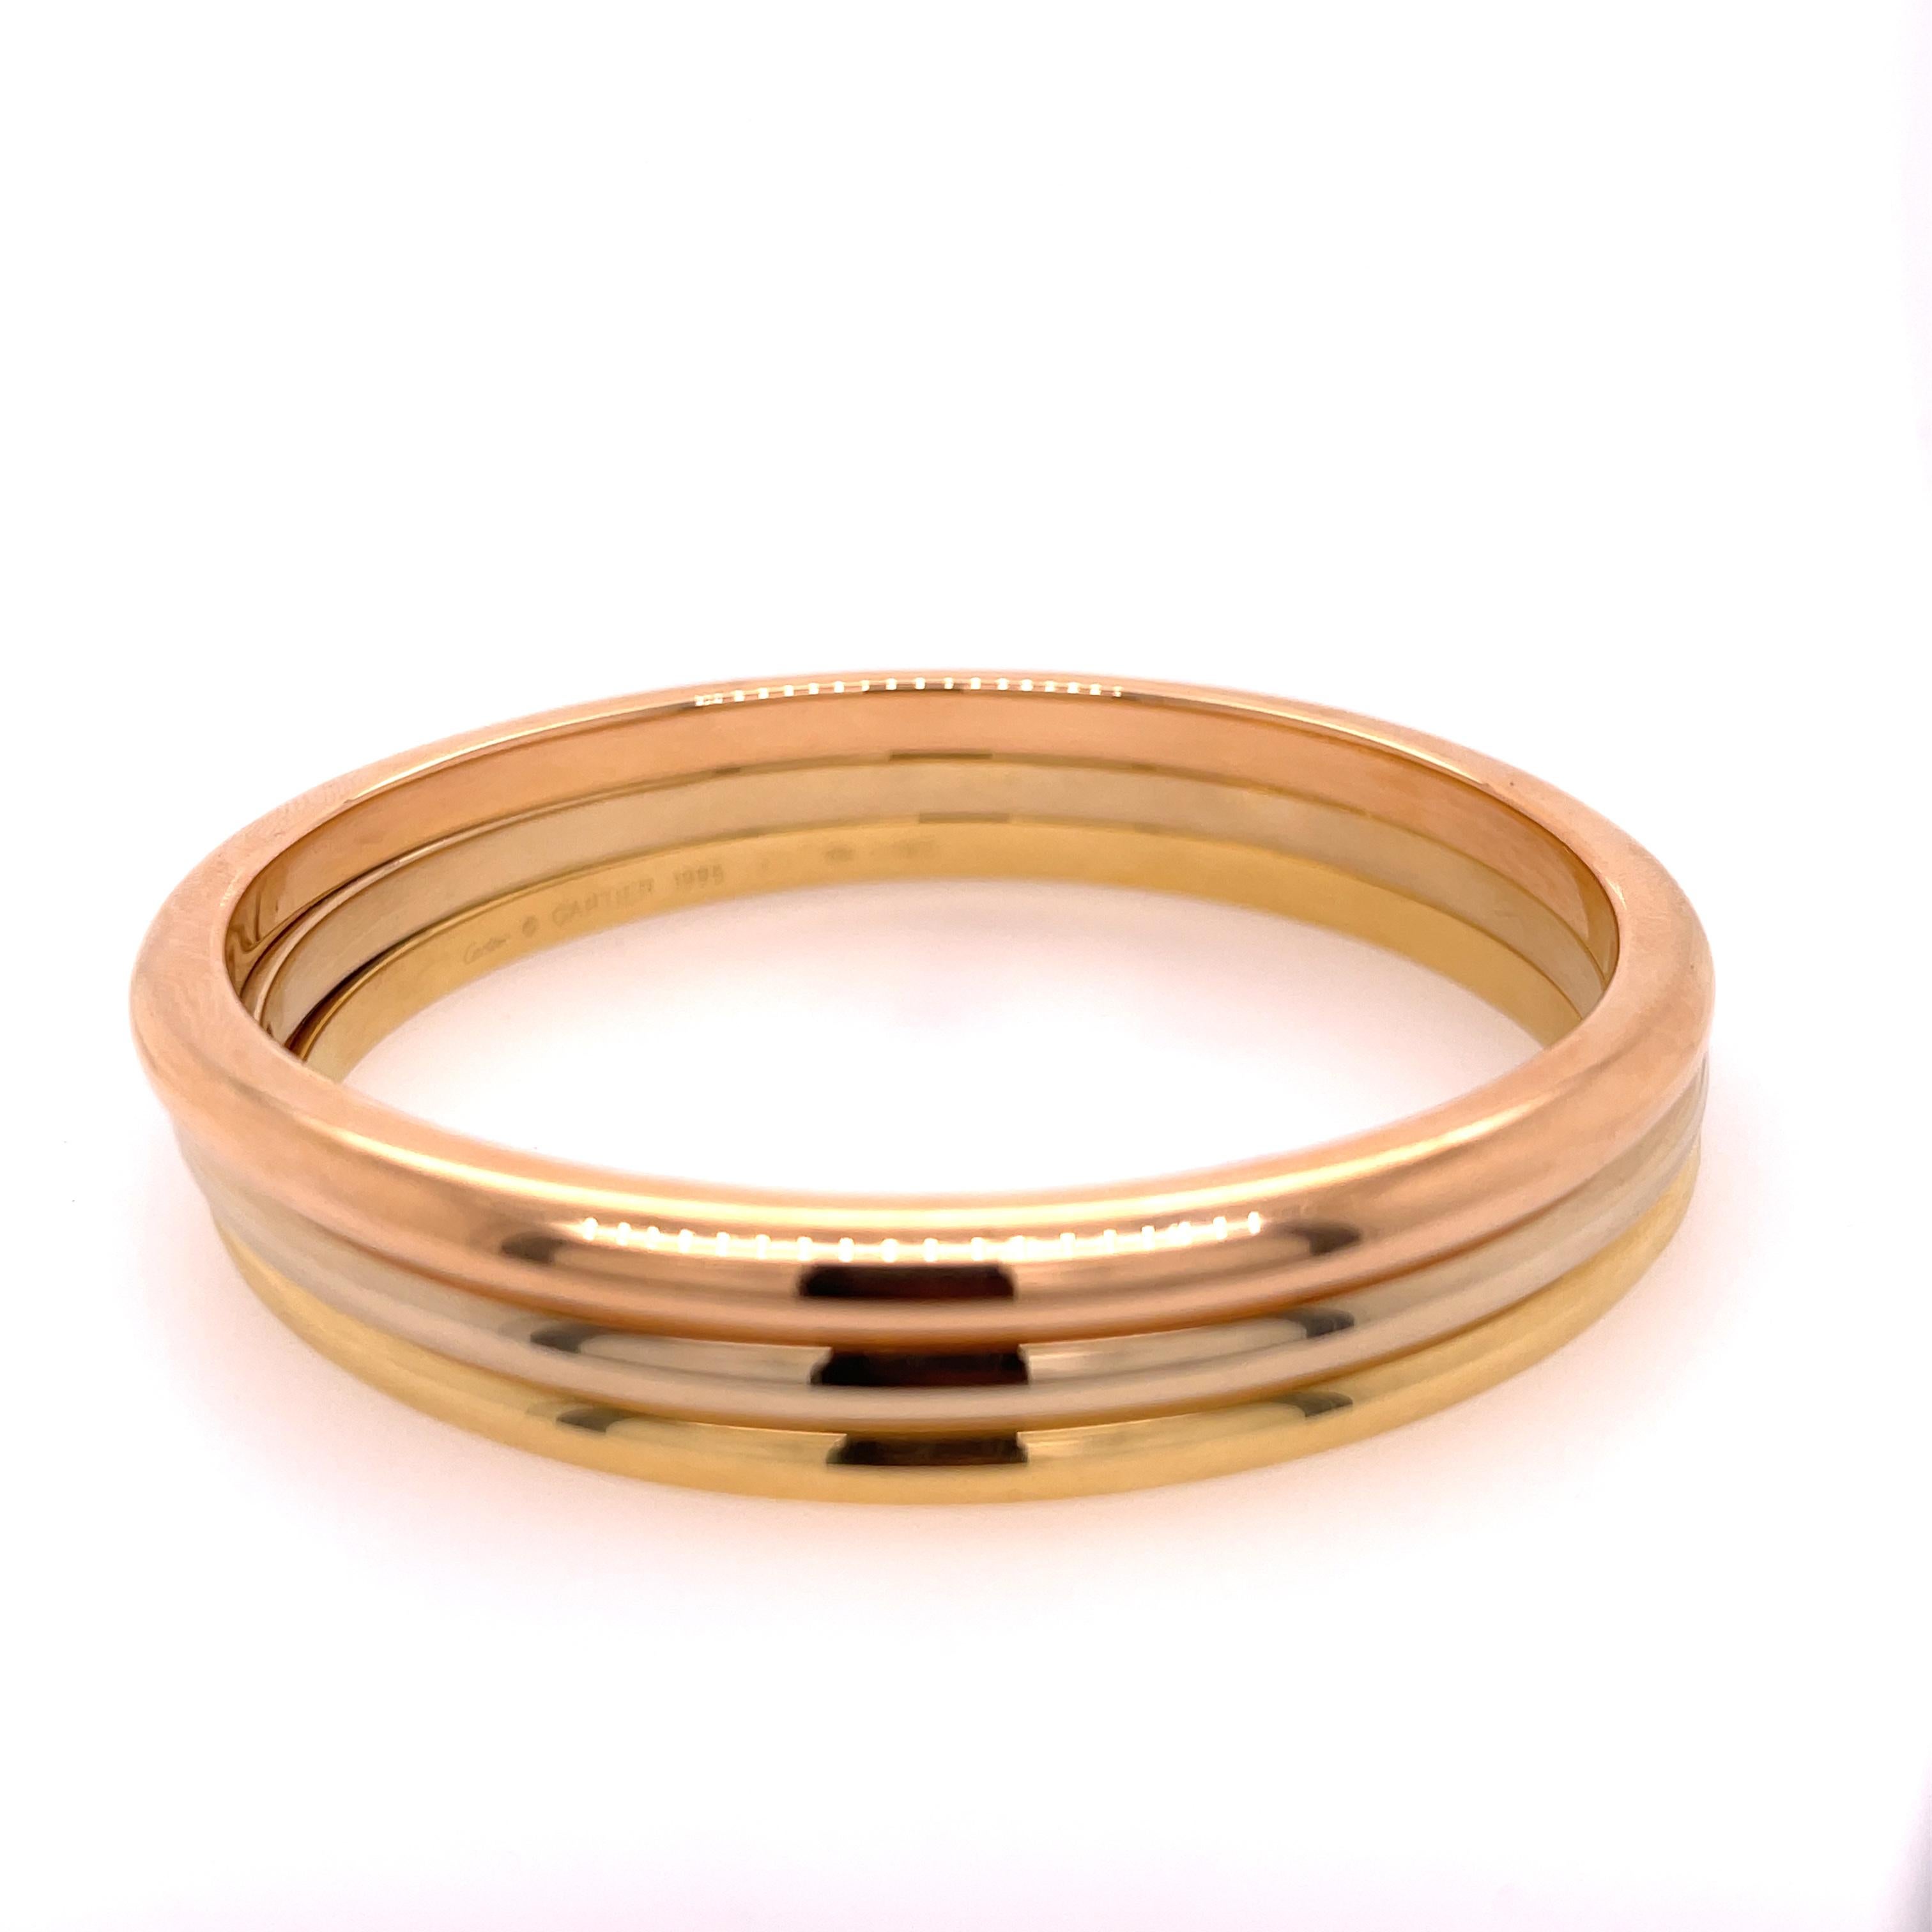 Three bangles in one by Cartier in 18K rose, white, and yellow gold.  The bangle has a inner diameter of 7 inches. Stamped Cartier 1995 60 750.